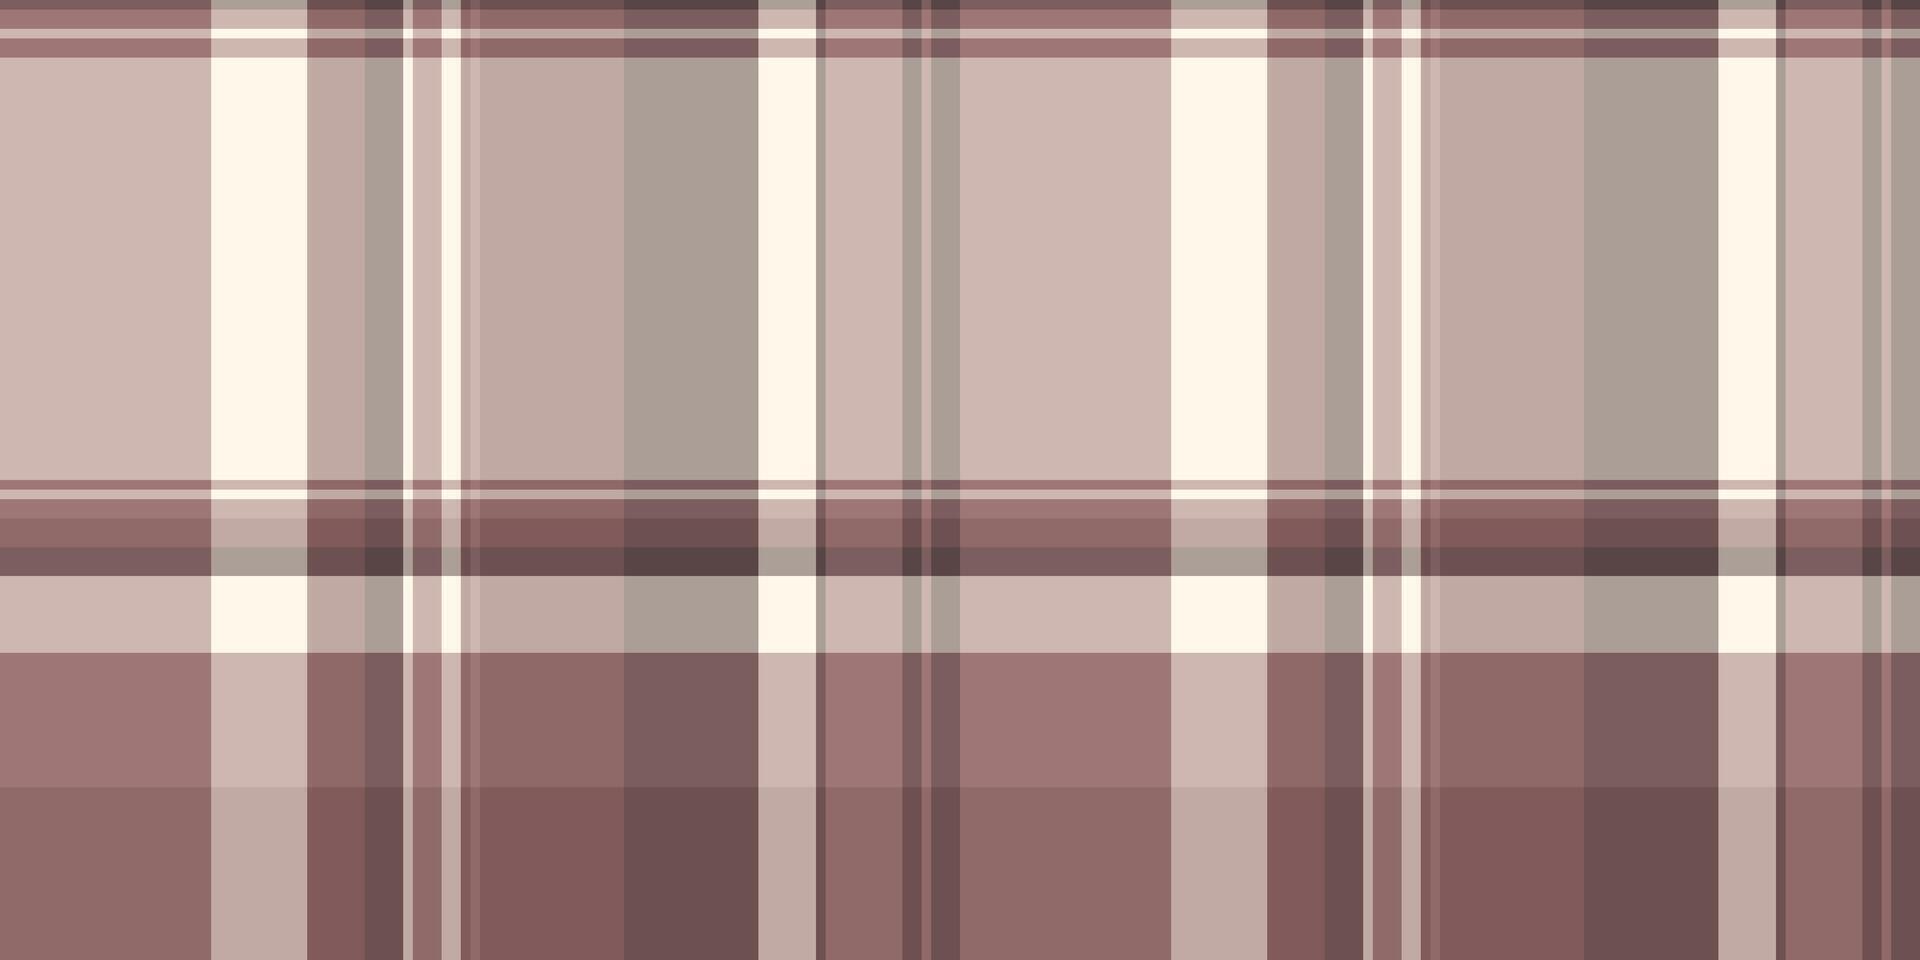 Complexity texture plaid check, dye tartan background textile. Pyjamas pattern fabric seamless in pastel and light colors. vector